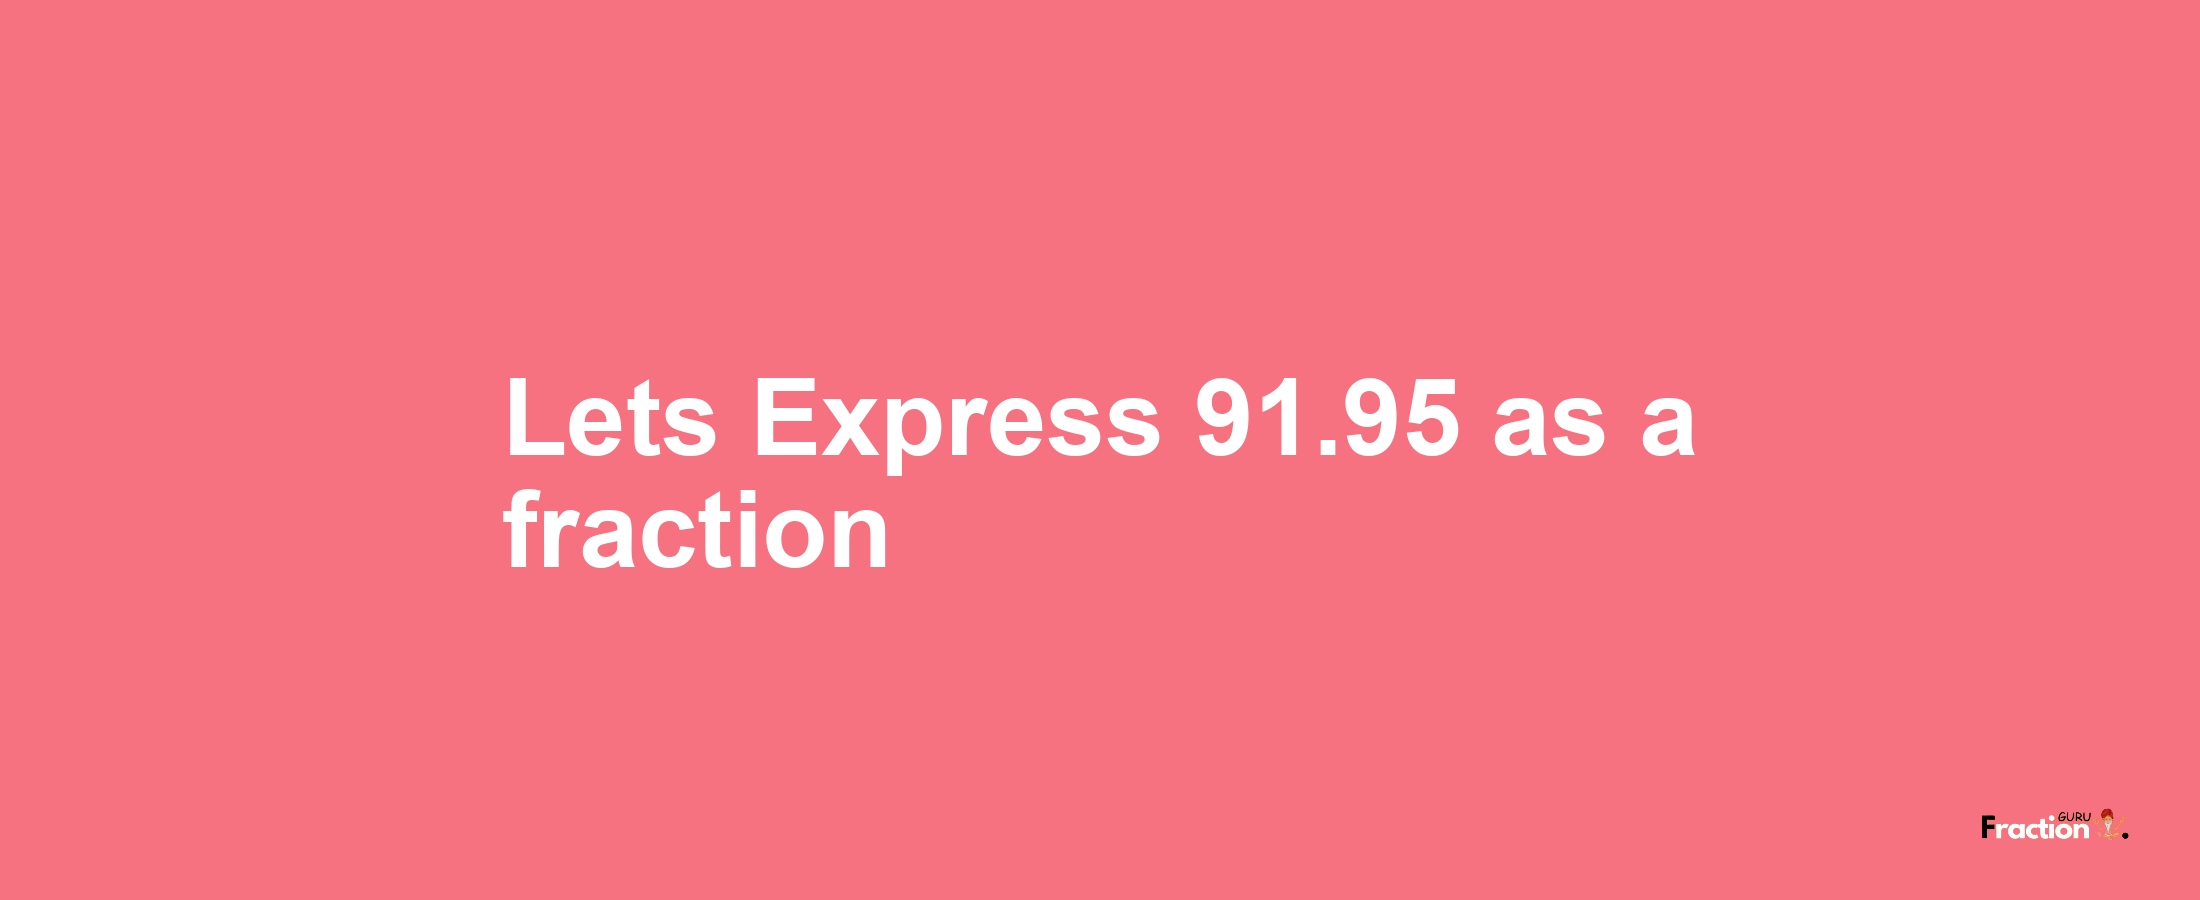 Lets Express 91.95 as afraction